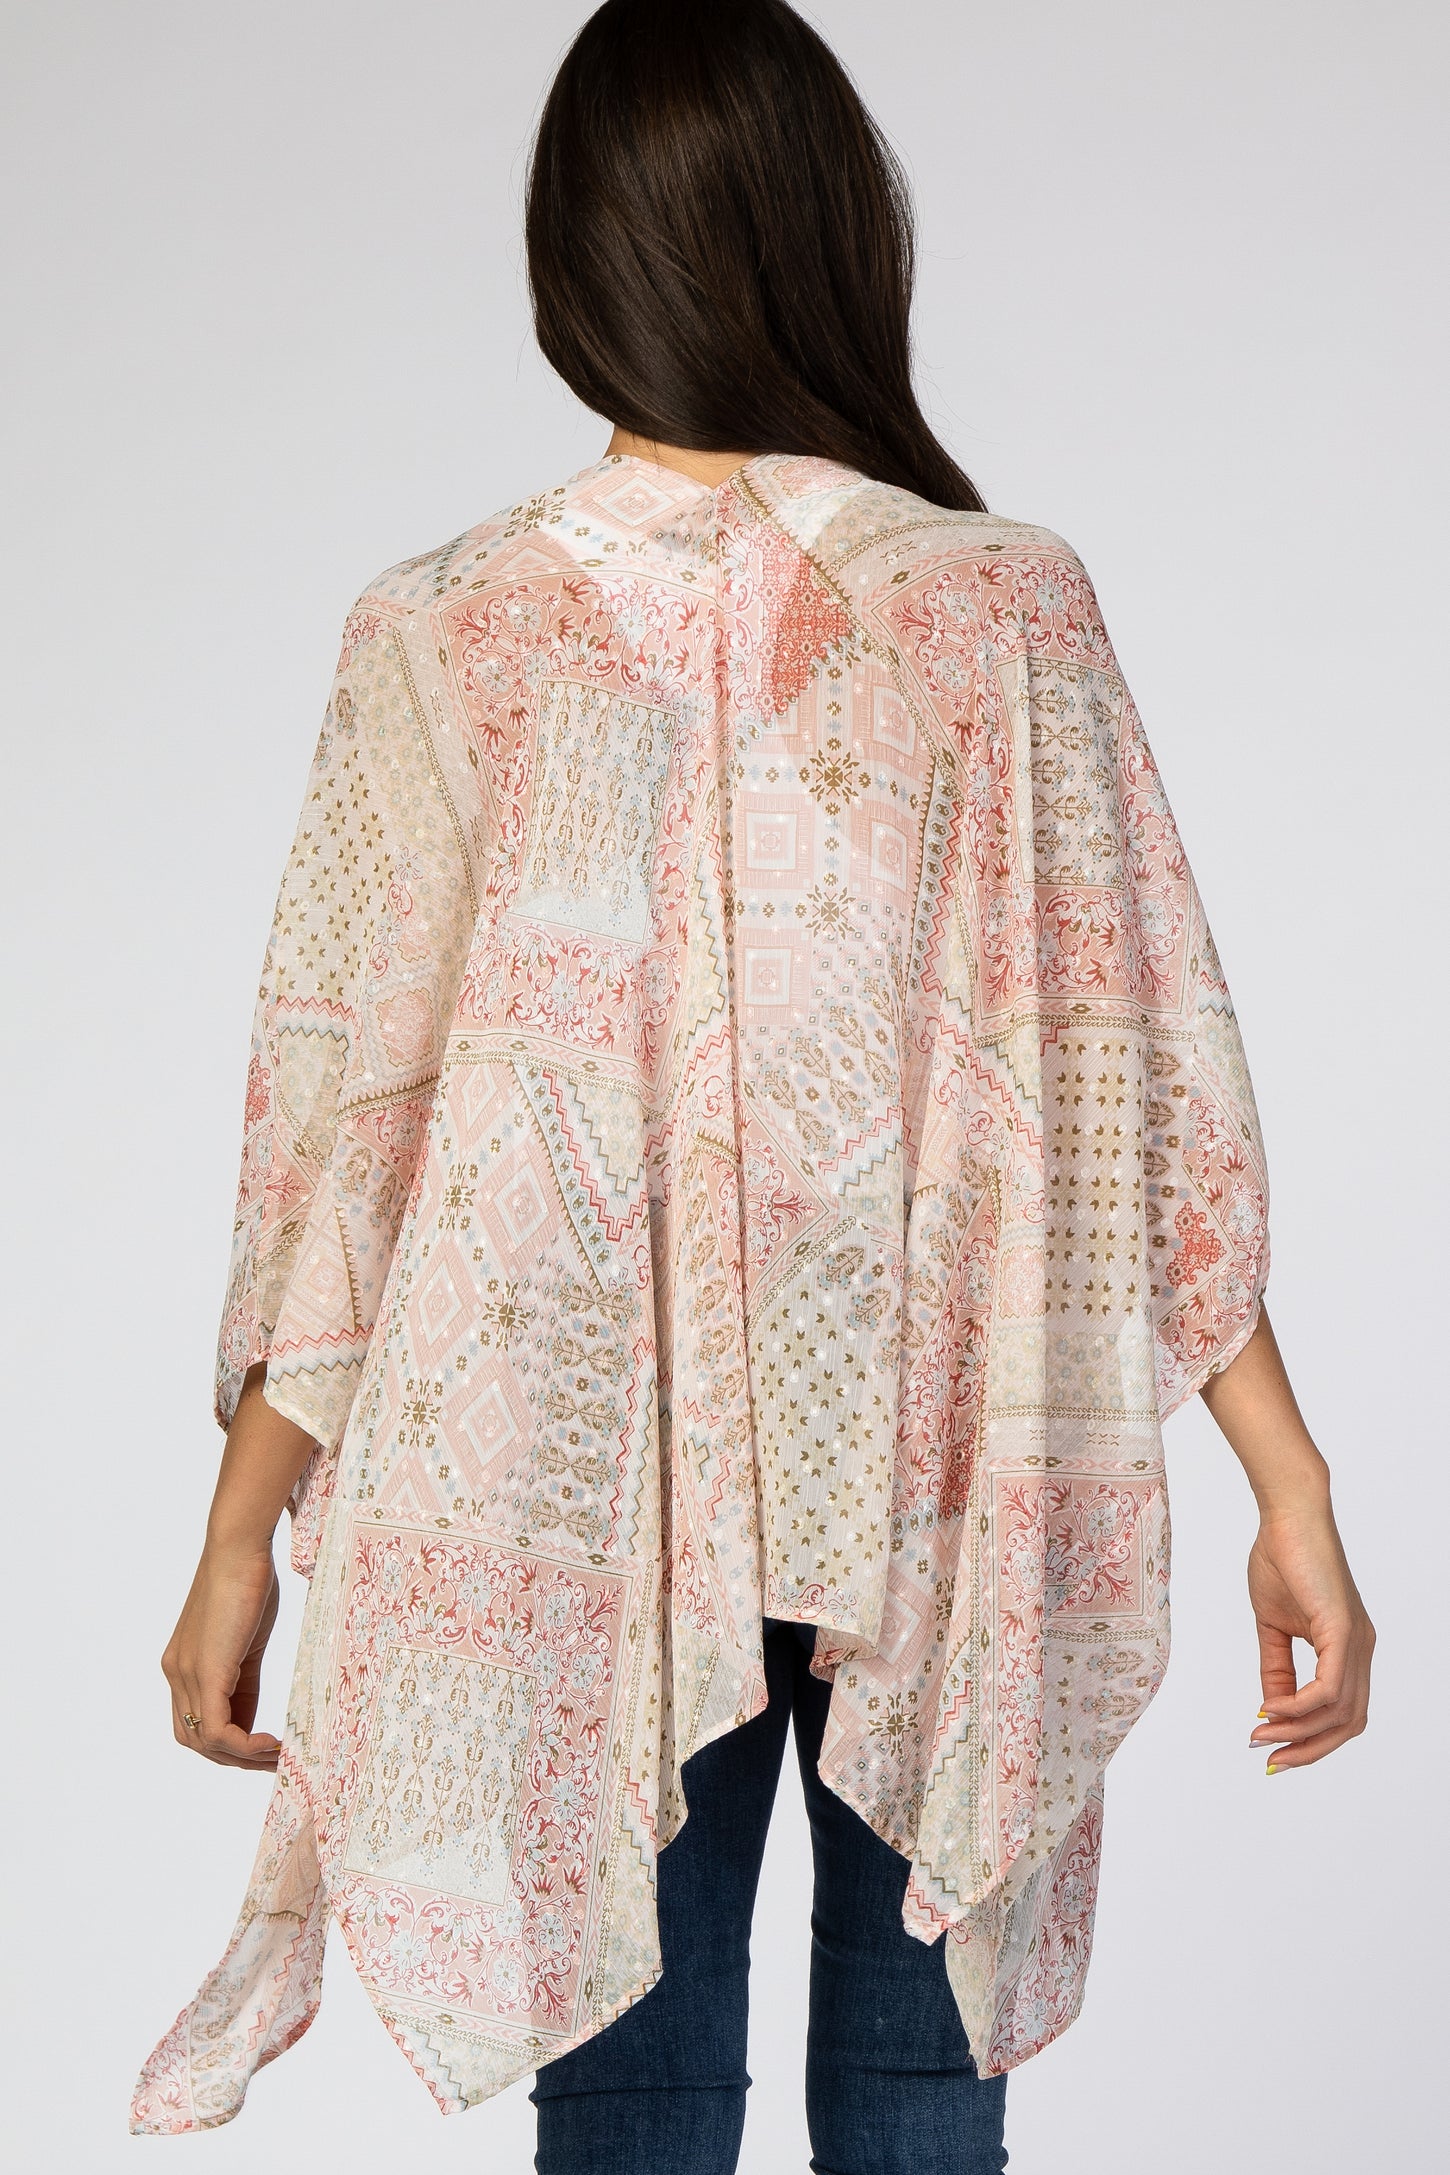 Mauve Floral Geometric Sheer Cover Up